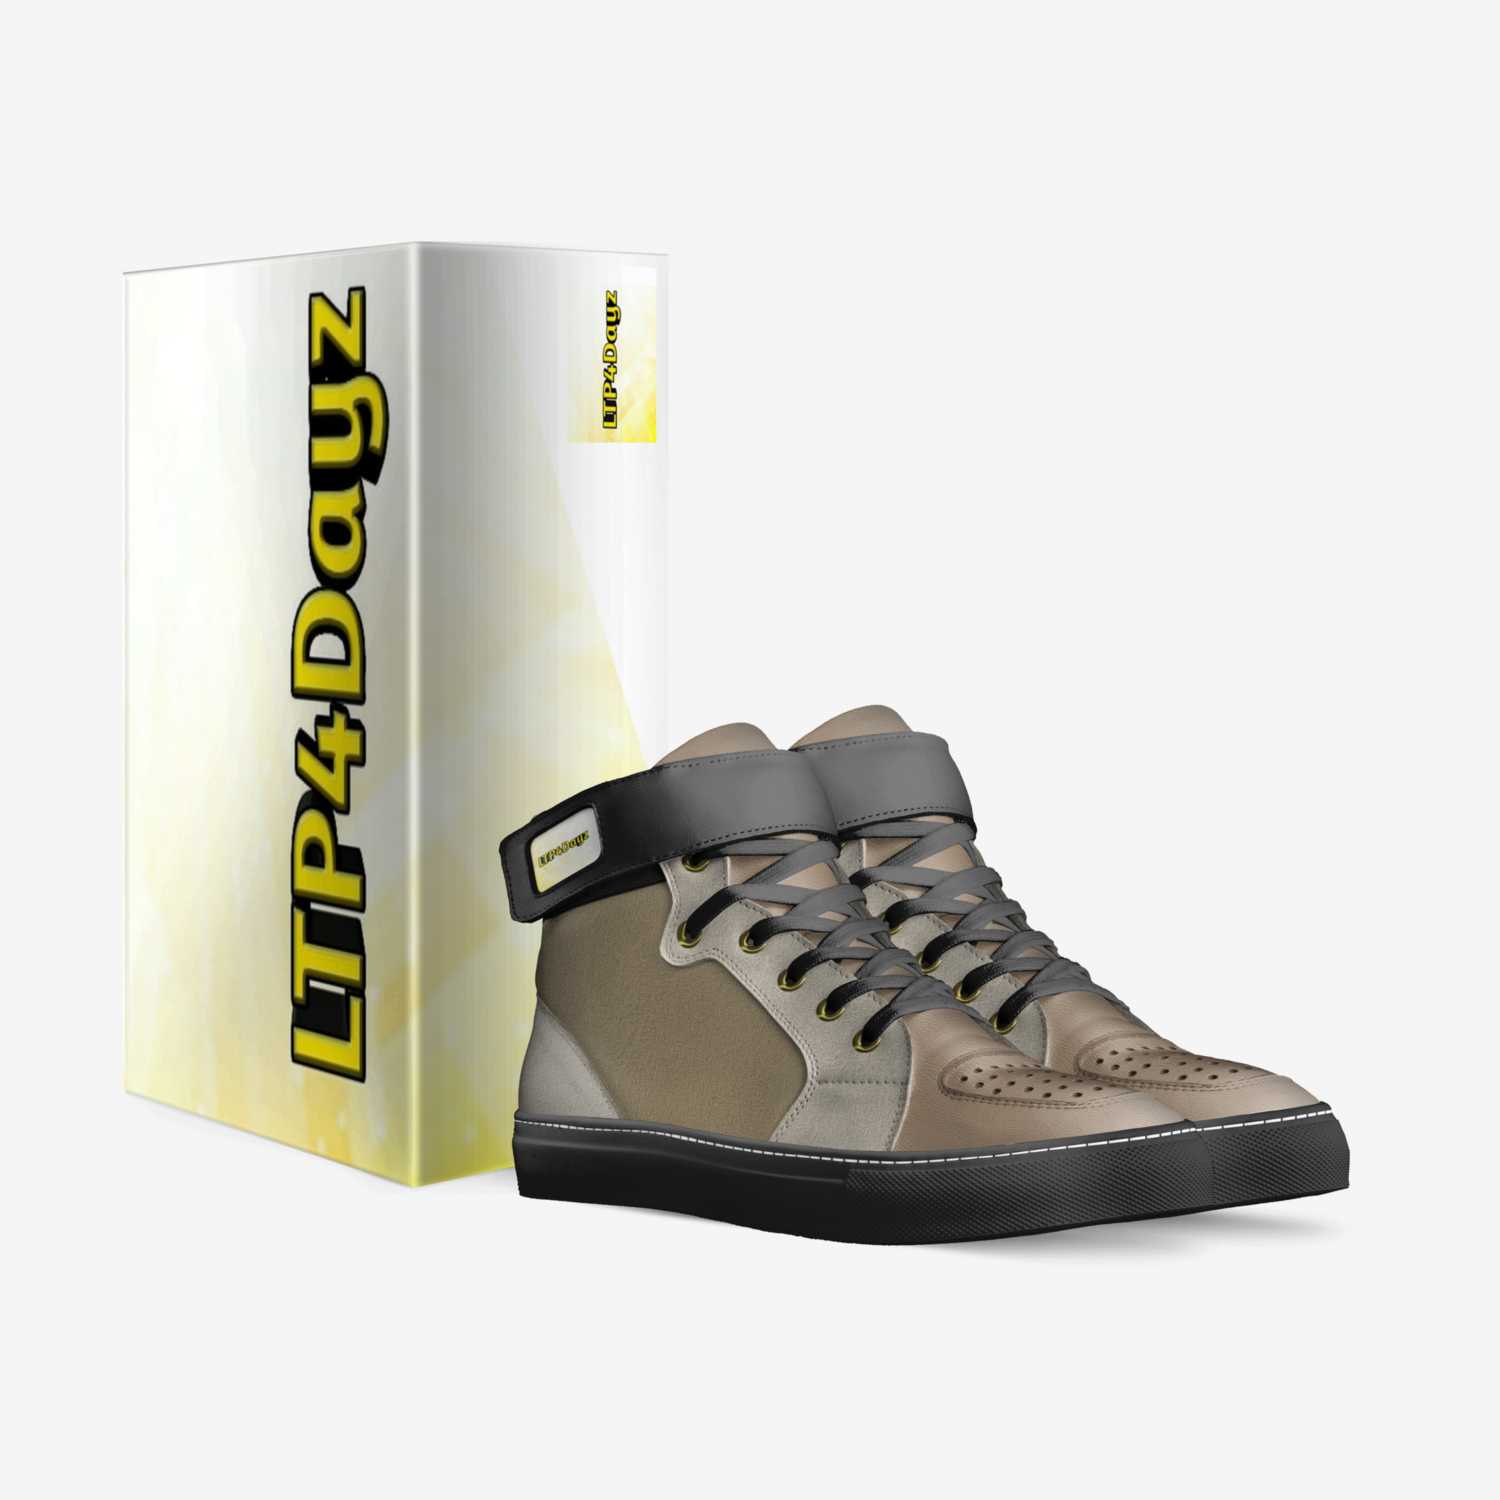 LTP 18 custom made in Italy shoes by Logan Presley | Box view